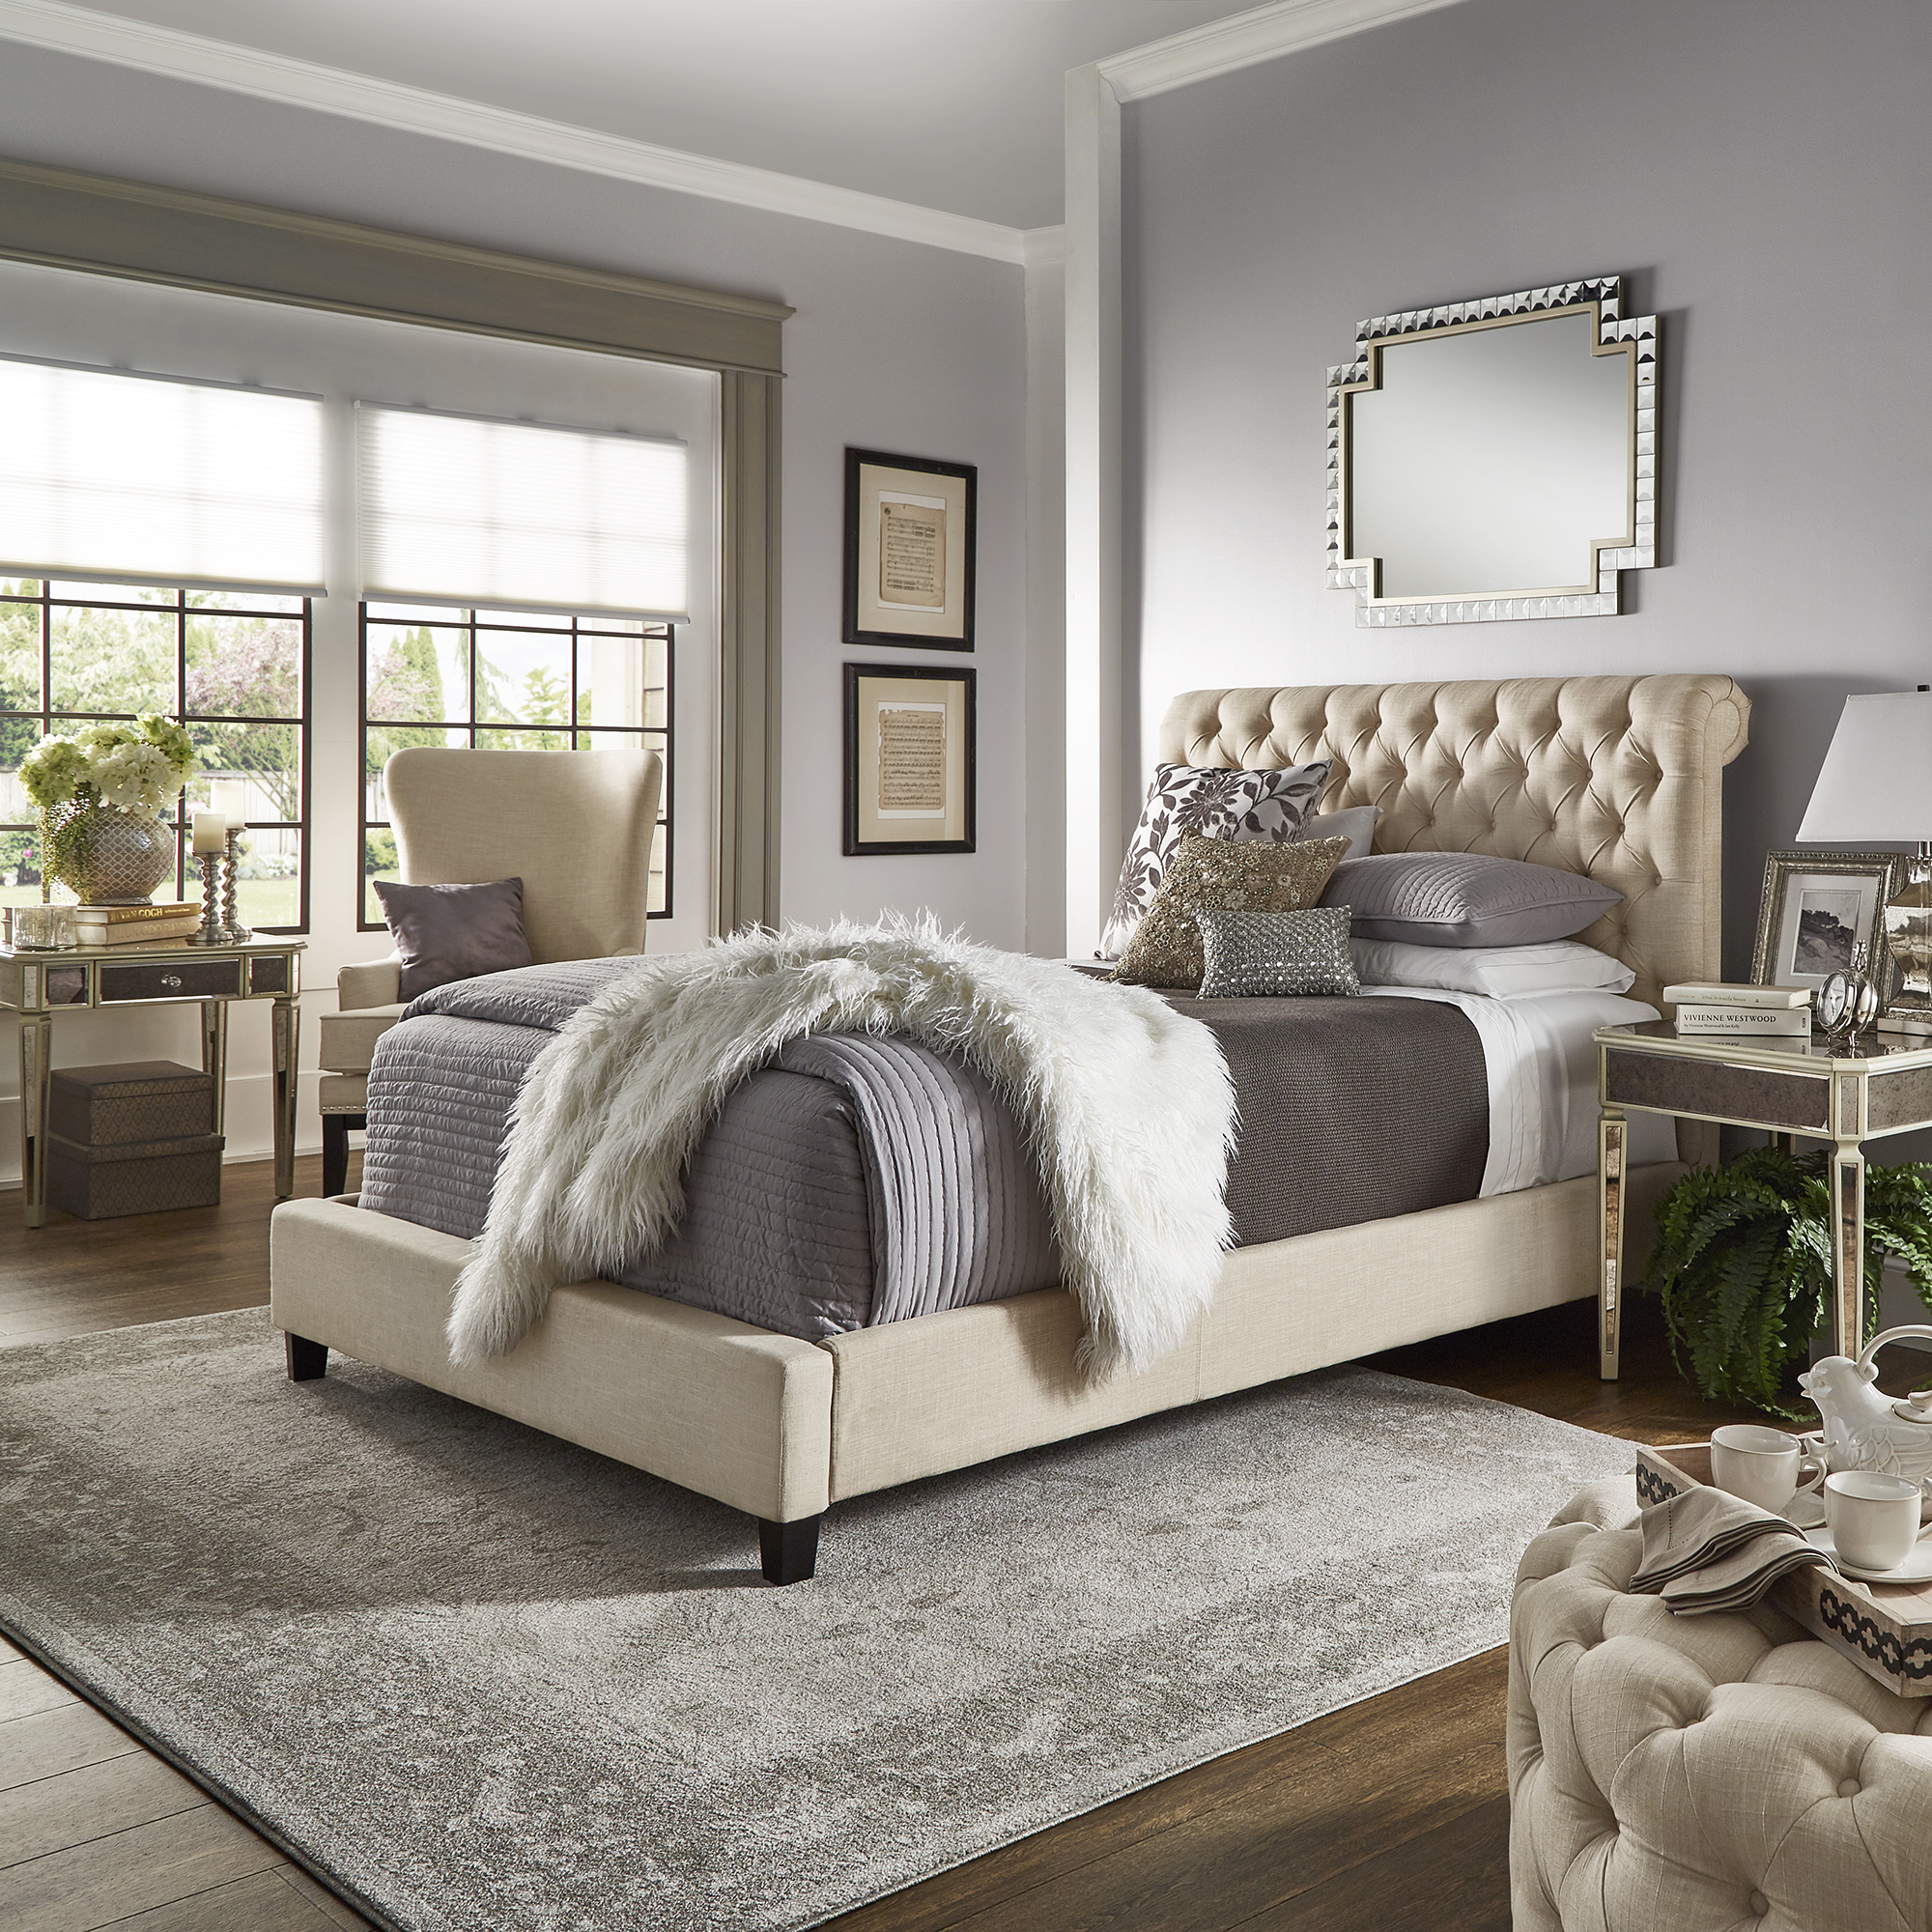 This last image features a chesterfield-inspired bed. There is button tufted beige linen upholstery and a rolled top headboard. The bed is elegantly dressed with grey and white bedding.